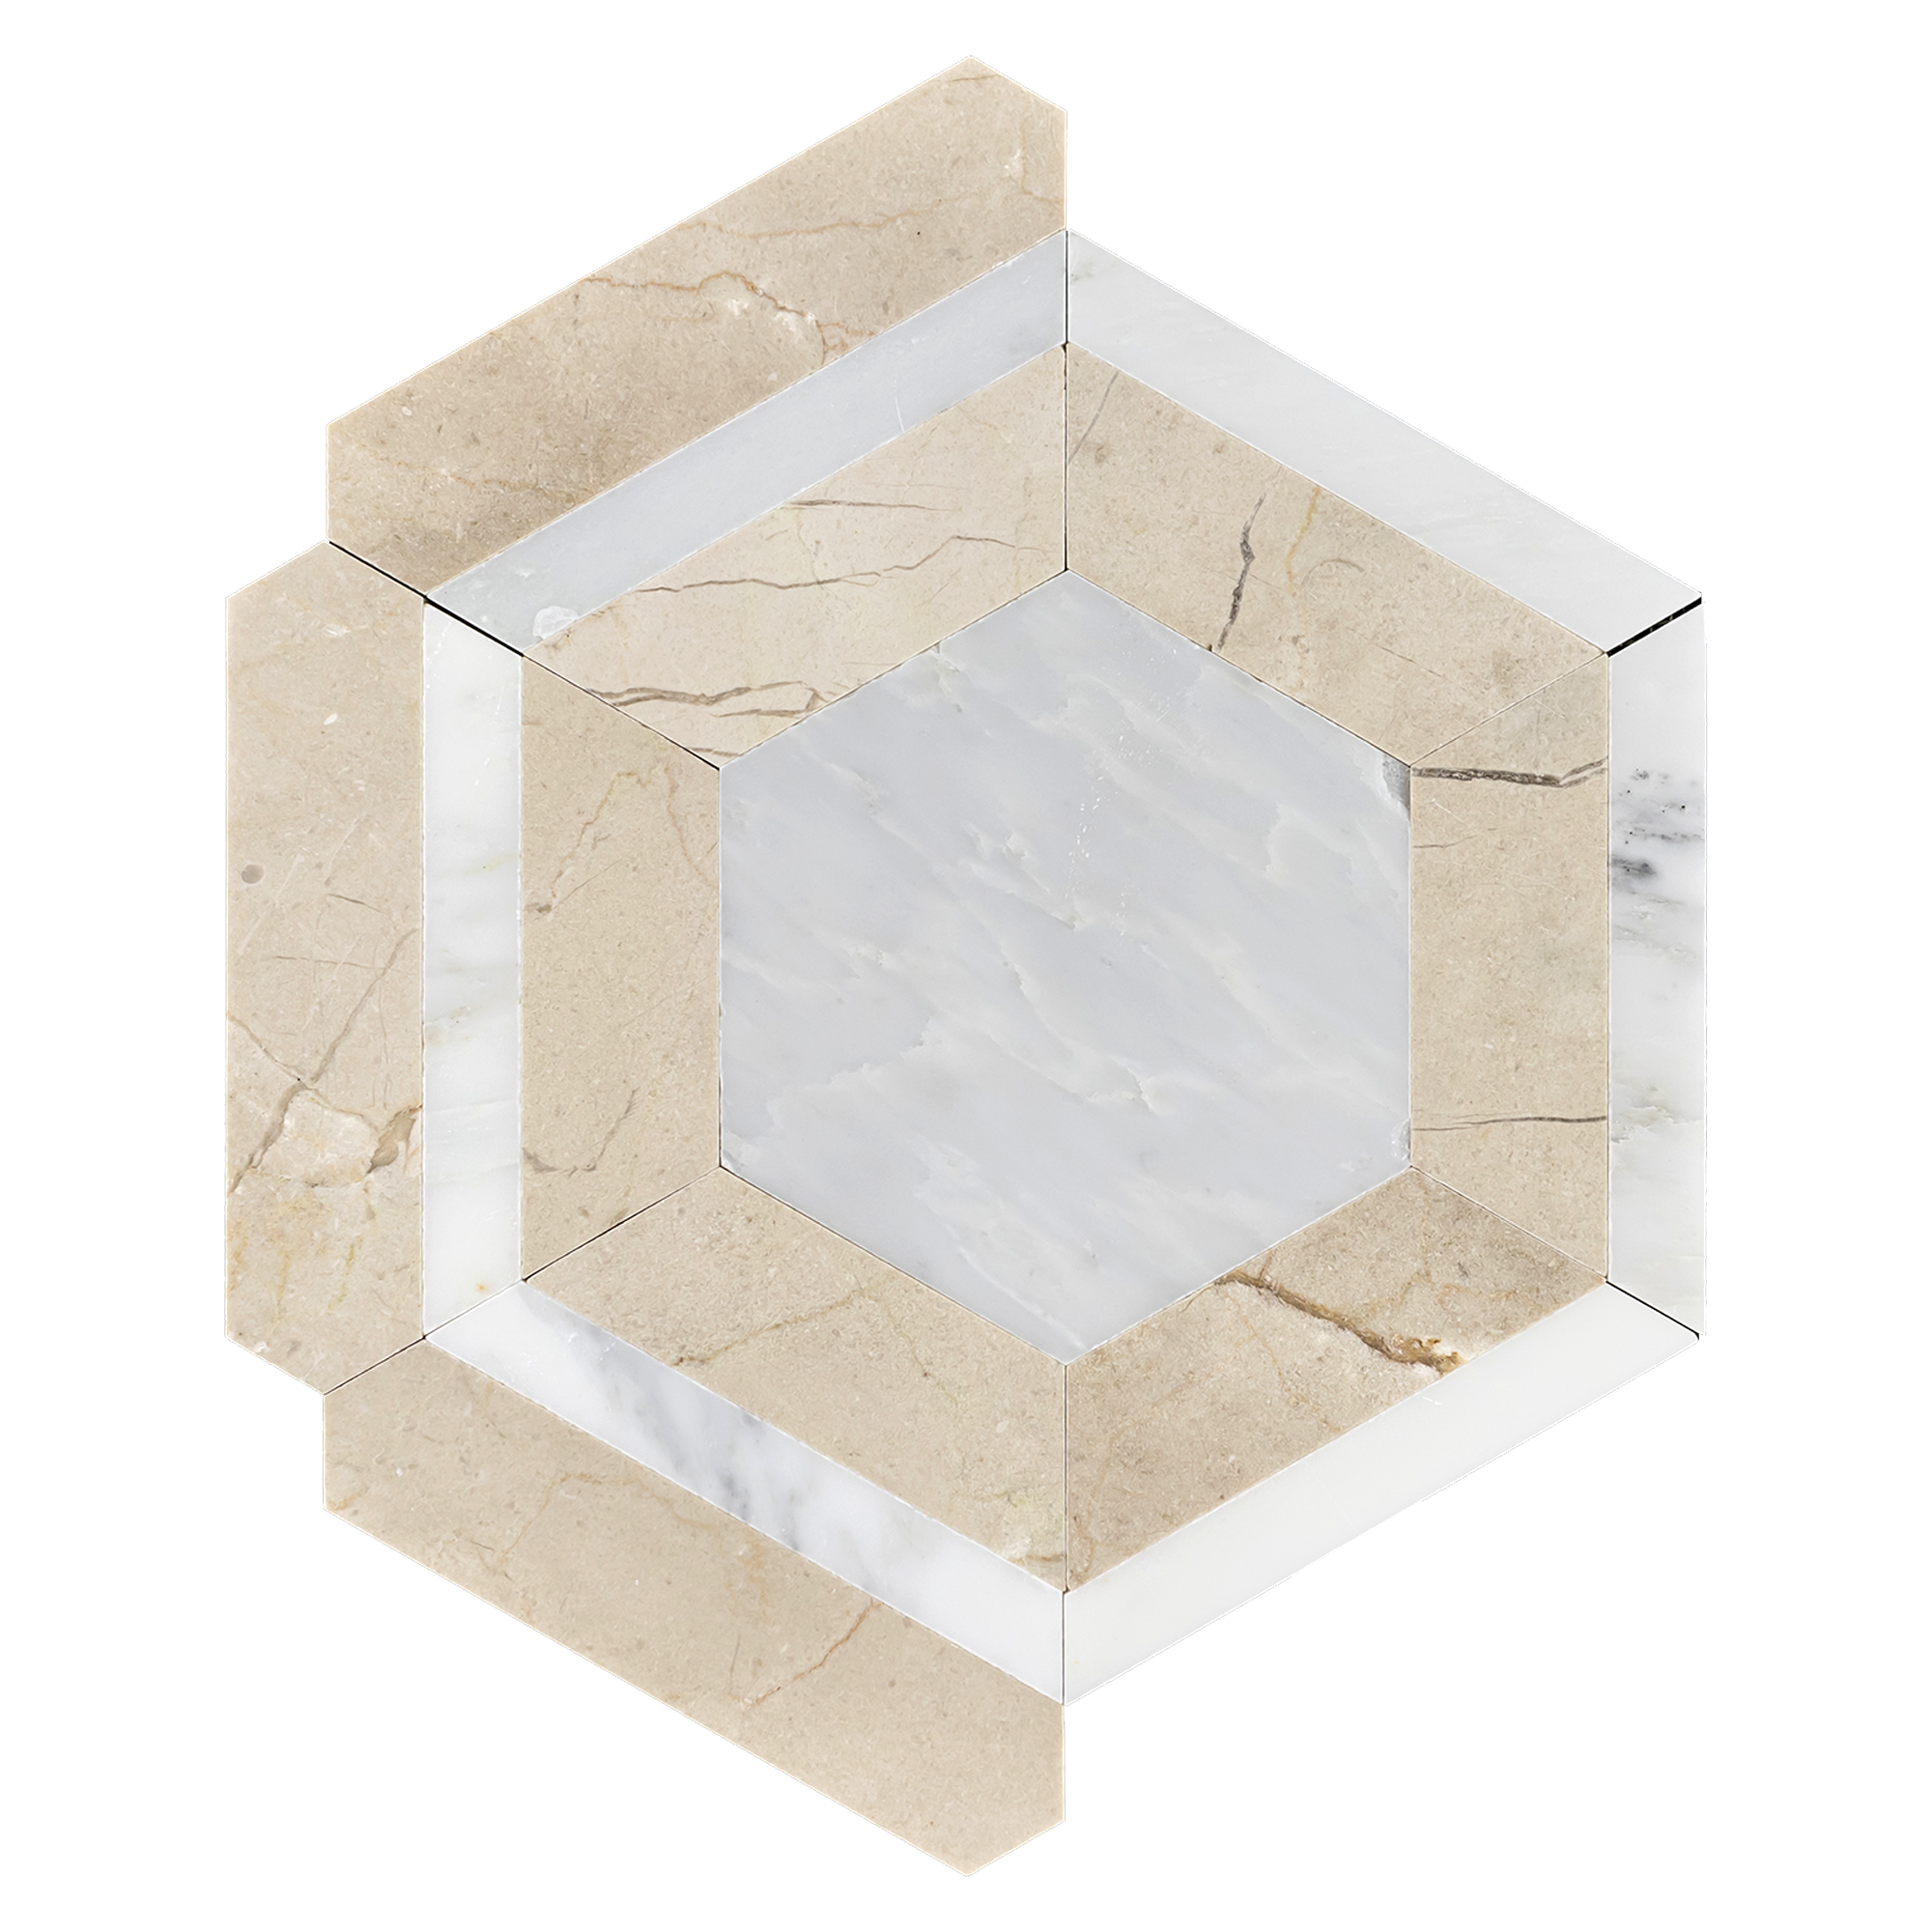 Elon Pearl White Crema Marfil Marble Outlined Hexagon Field Mosaic 11.8125x12.75x0.375 Honed - Surface Group International Product